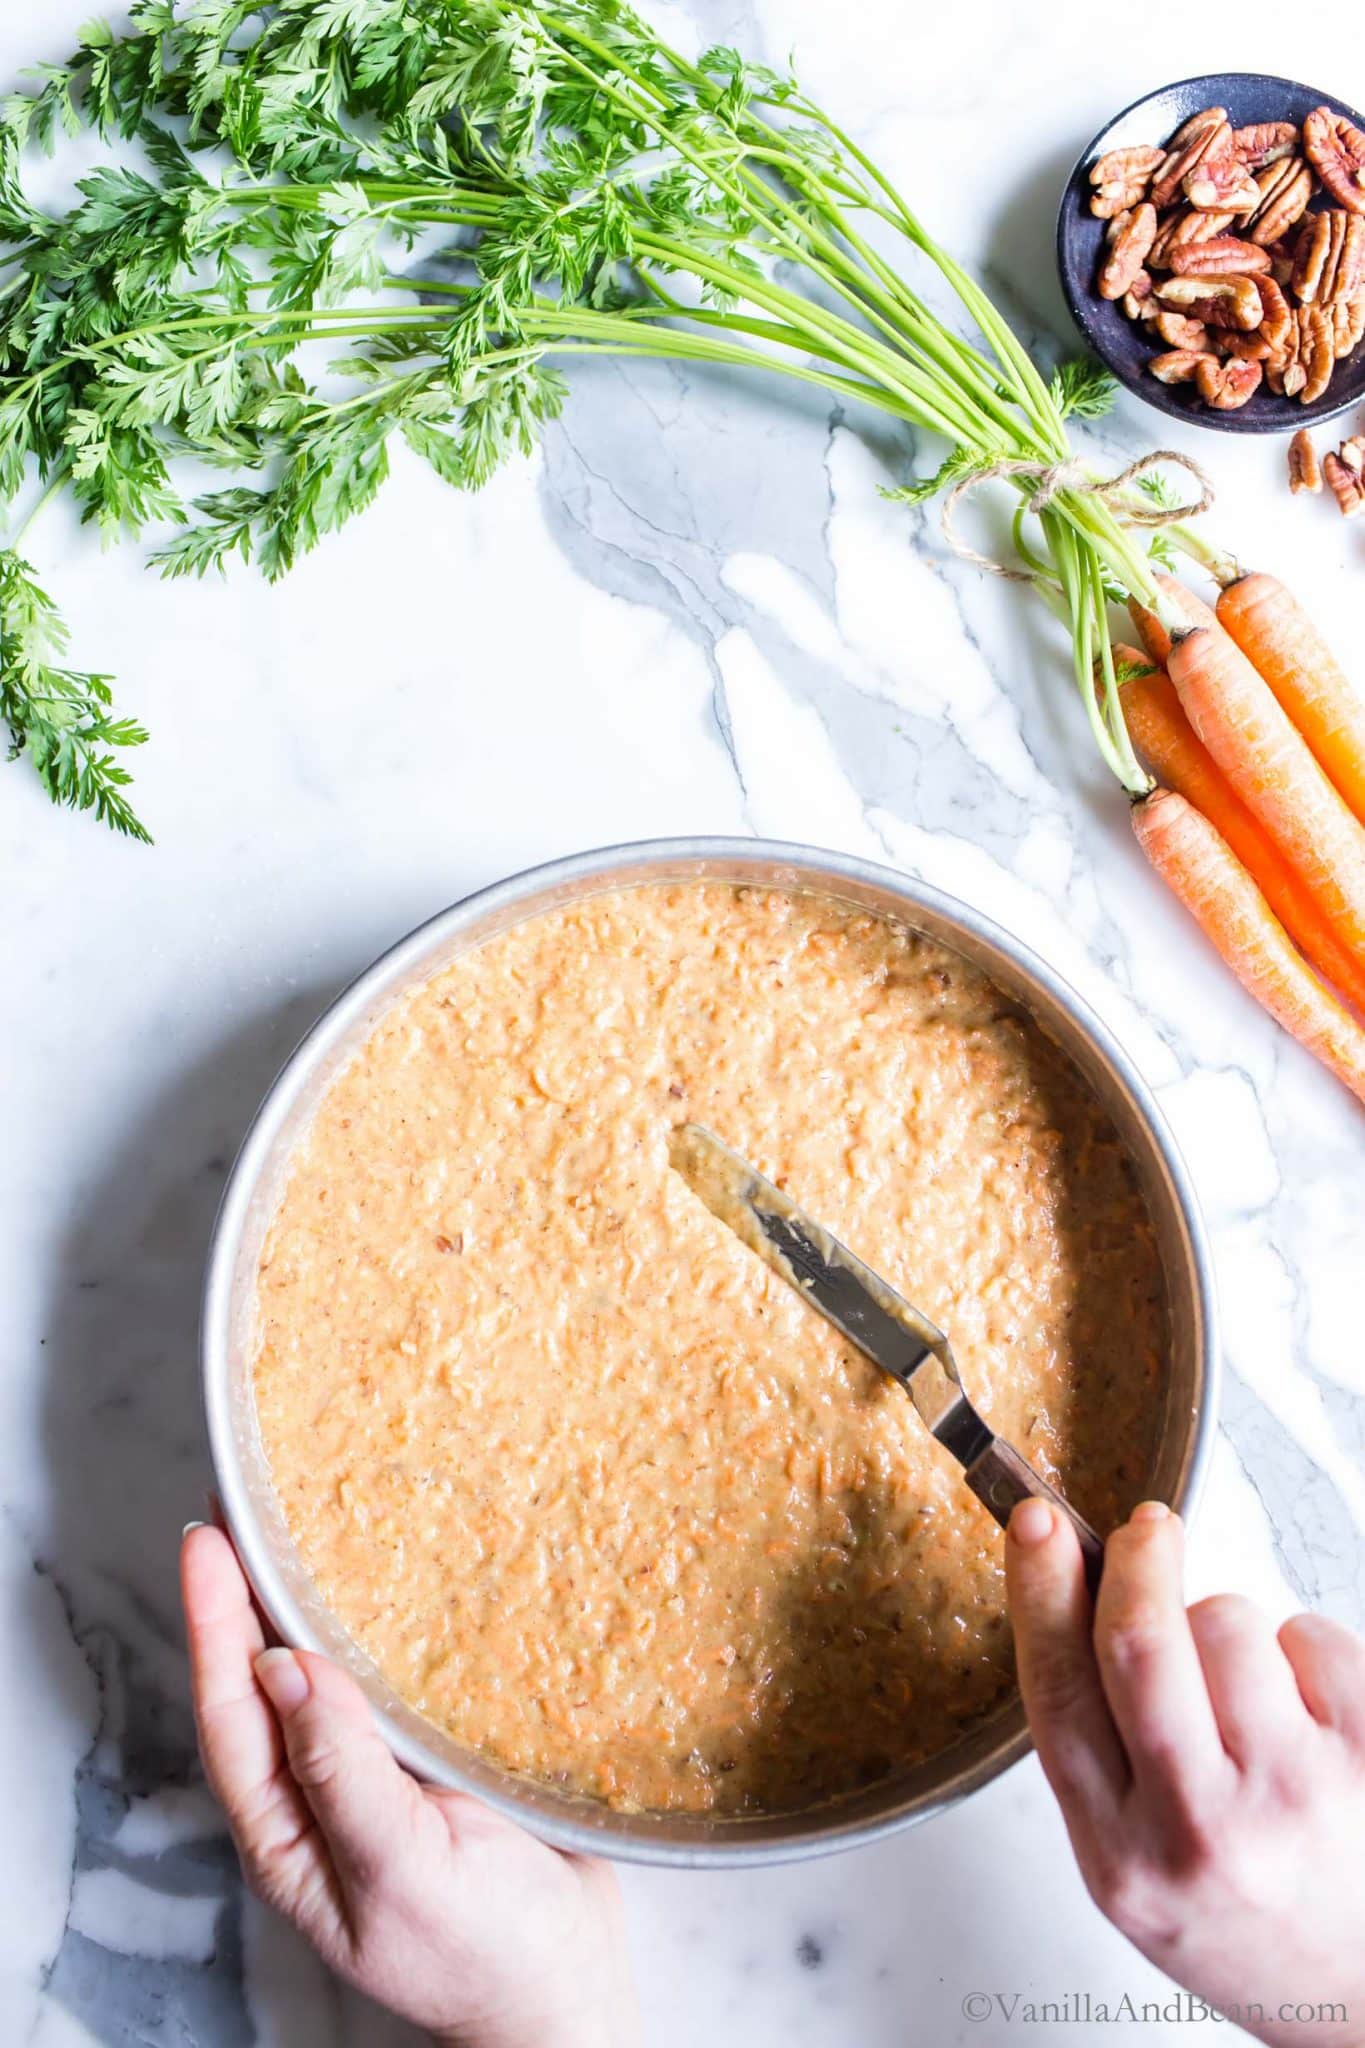 Smoothing Carrot Cake with pineapplebatter into a pan.